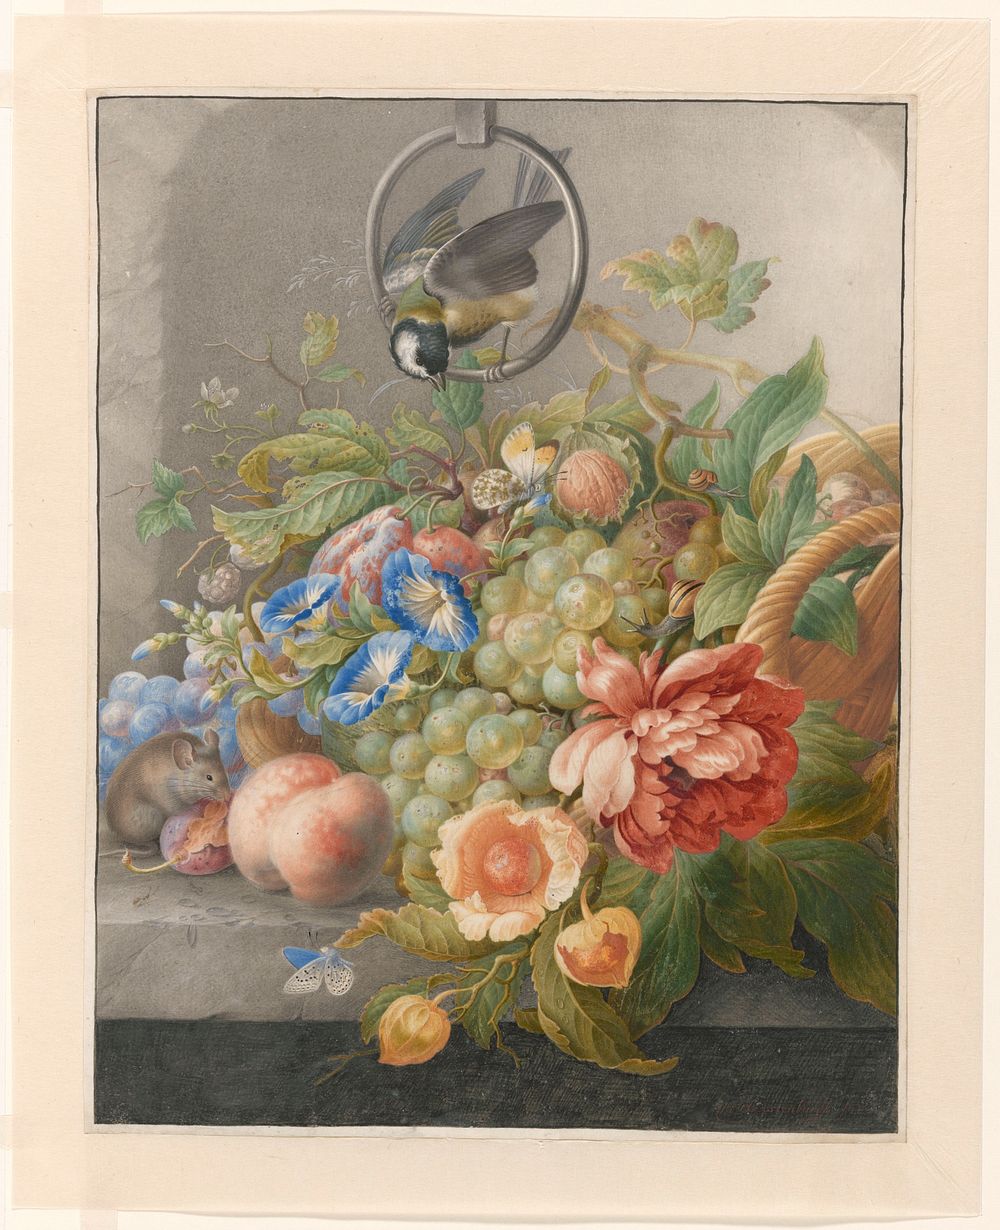 Still Life with Flowers, Fruit, a Great Tit and a Mouse (c. 1700 - c. 1710) by Herman Henstenburgh